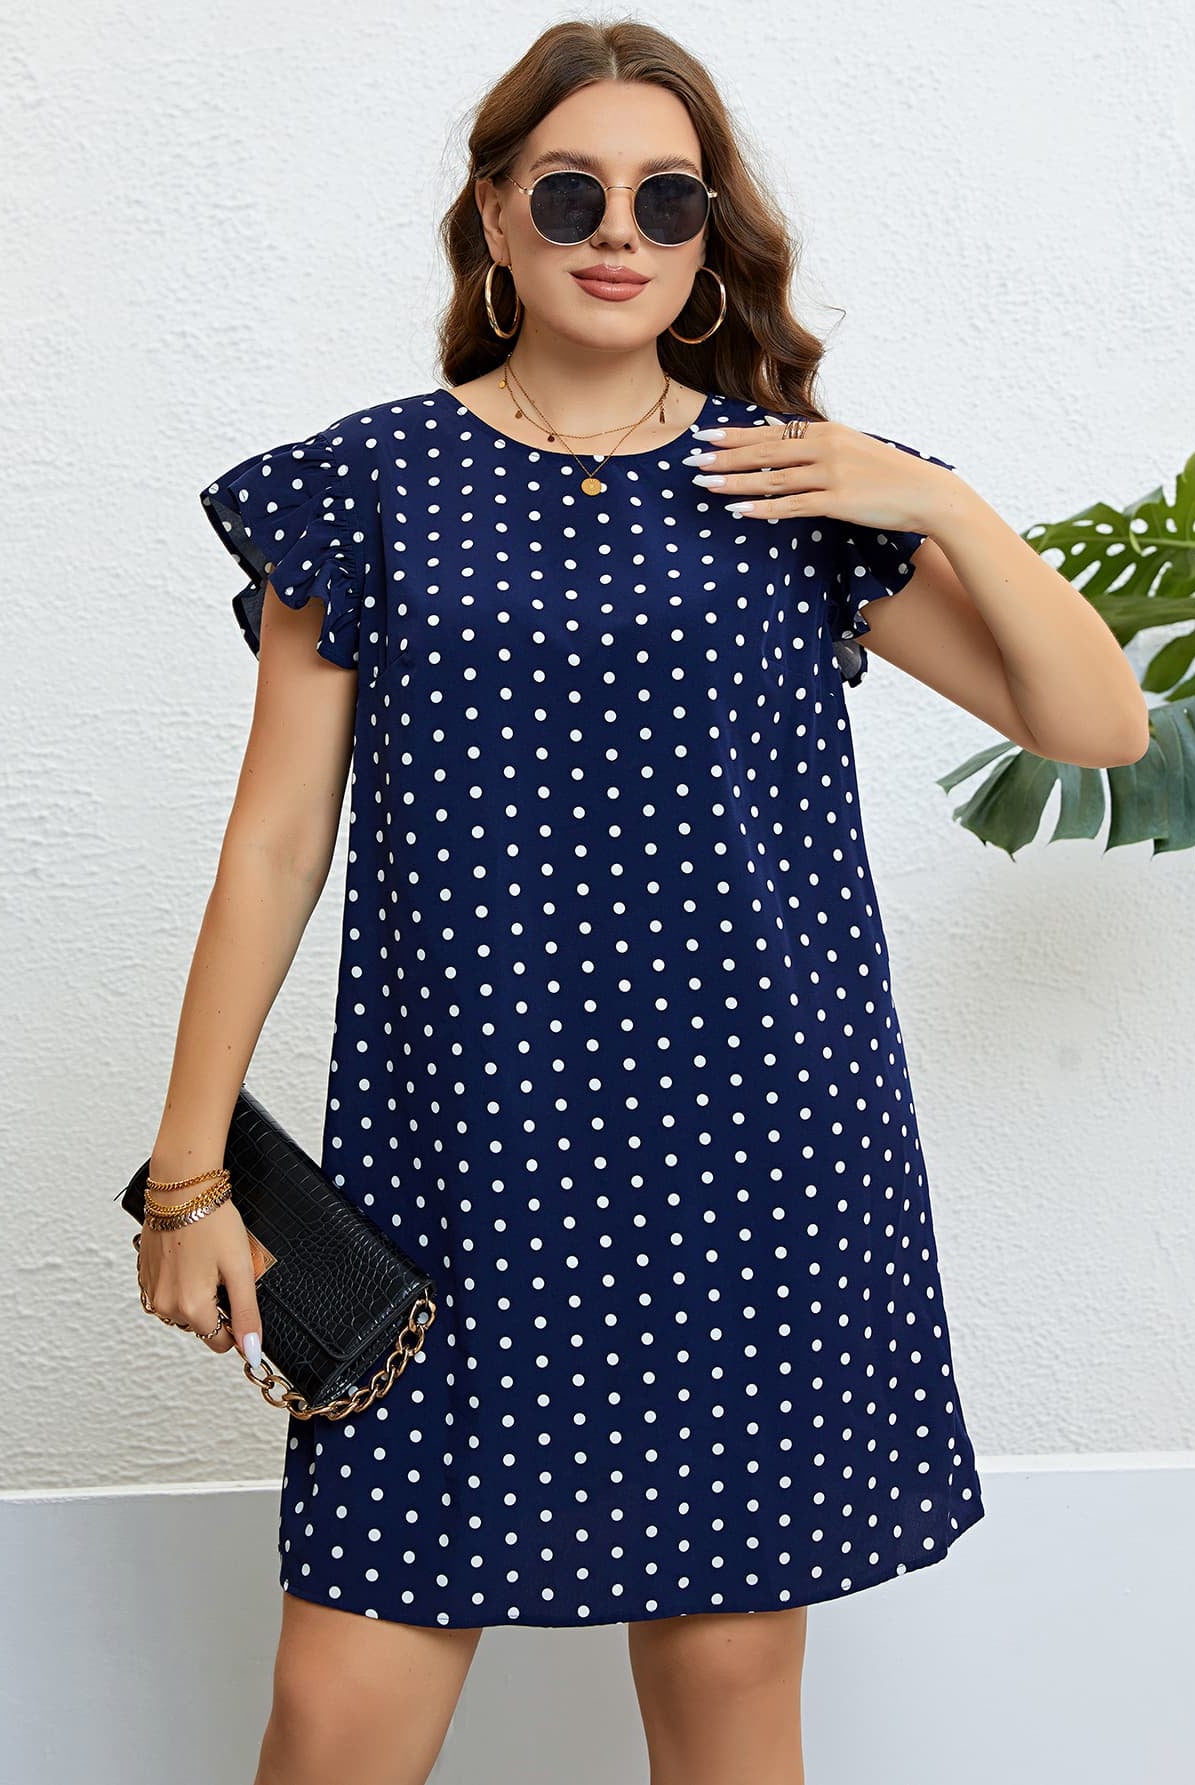 Midnight Blue See You Later Boy Plus Size Polka Dot Round Neck Dress Plus Size Dresses